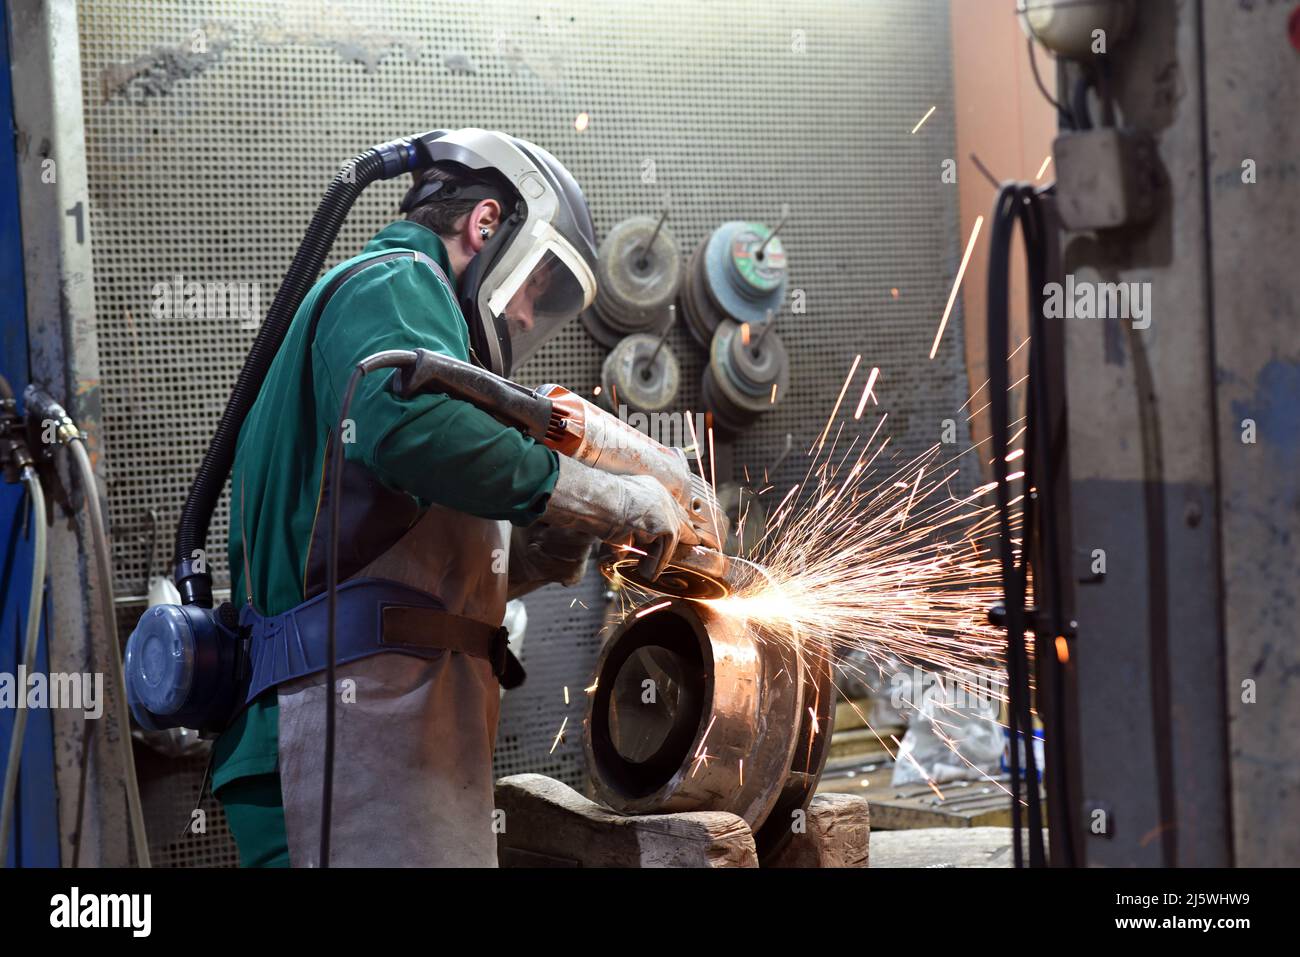 workers in safety clothing sanding a casting in an industrial company Stock Photo